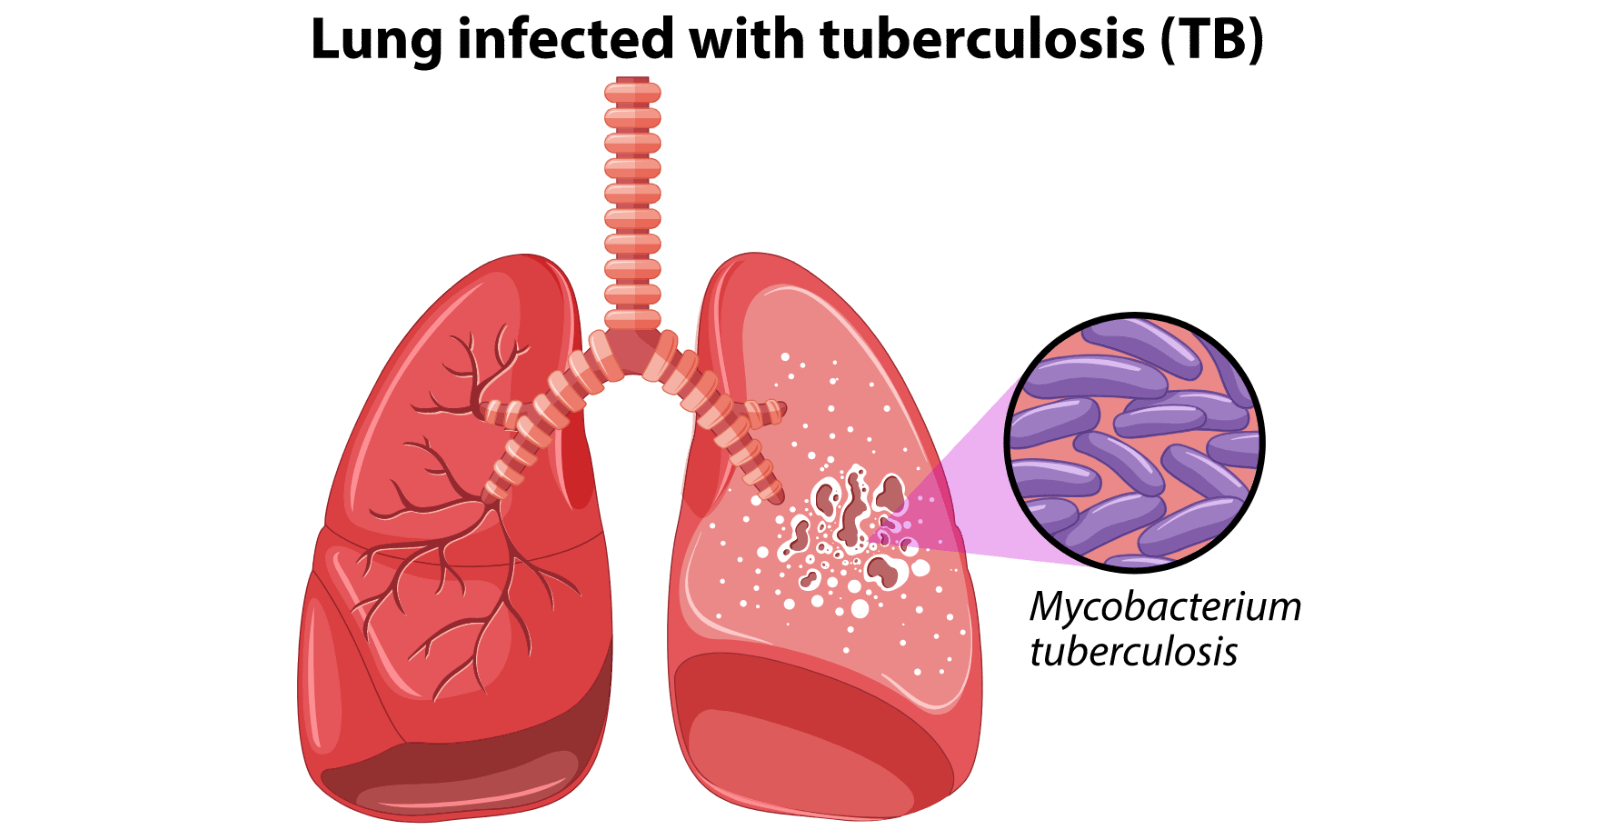 Tuberculosis: Symptoms, Causes, Treatment & Prevention